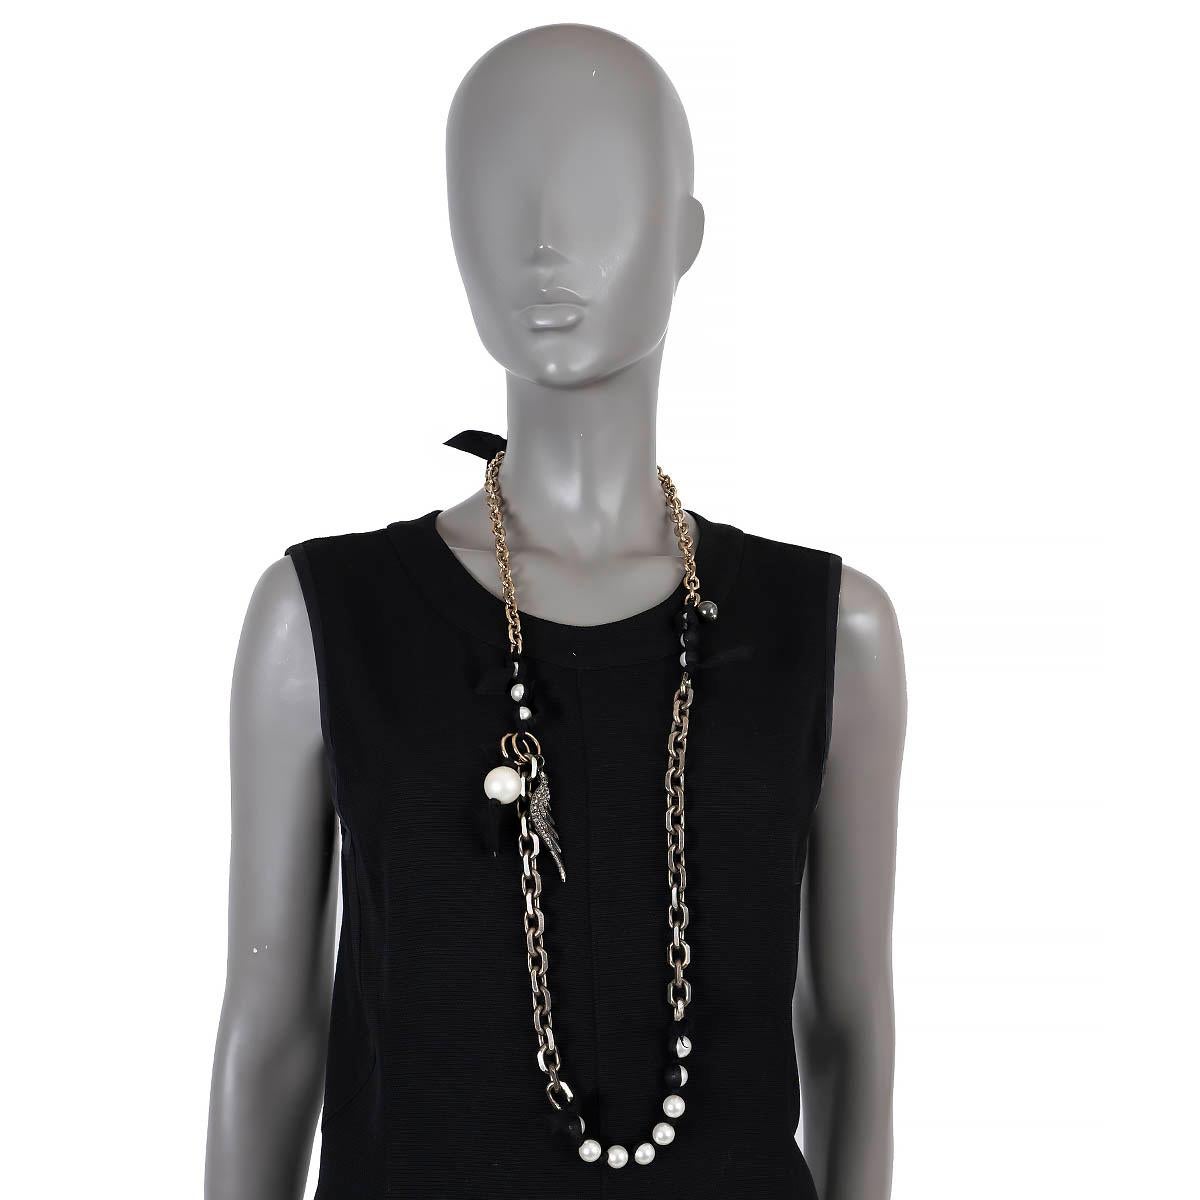 100% authentic Lanvin necklace in gold-tone and antique silver chains and black grosgrain ribbon with faux pearls. Features a crystal encrusted wing. Has been worn and is in excellent condition. 

Measurements
Length	108cm